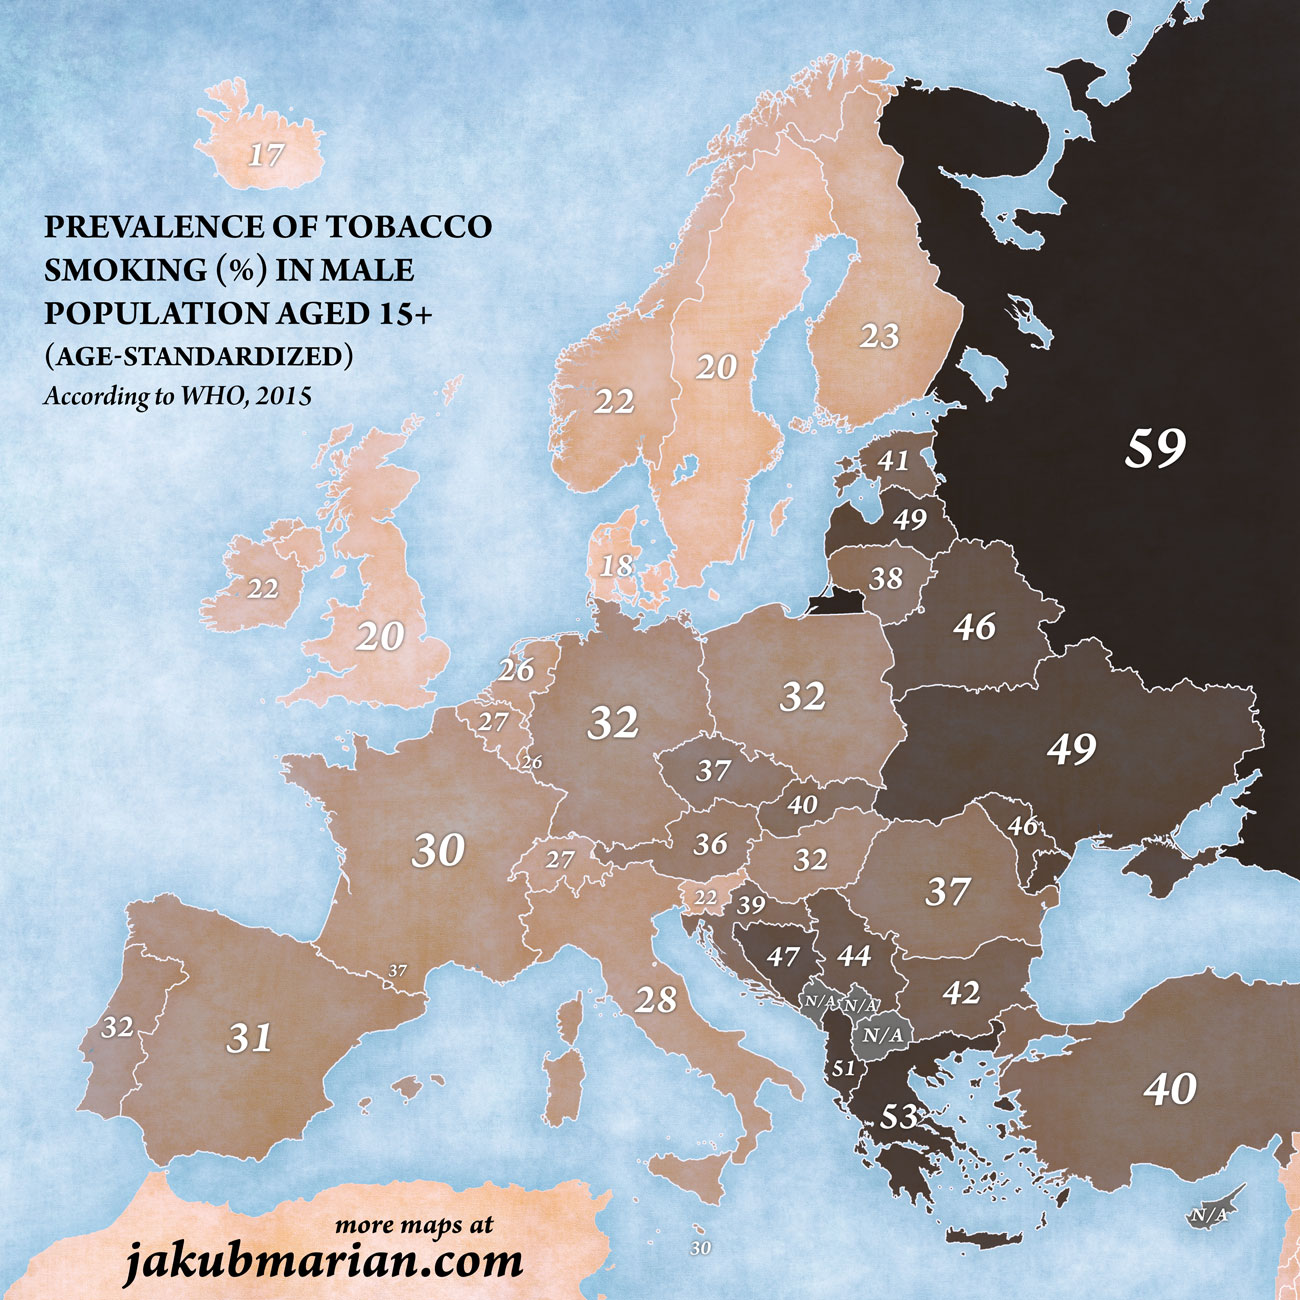 Smoking prevalence among males in Europe